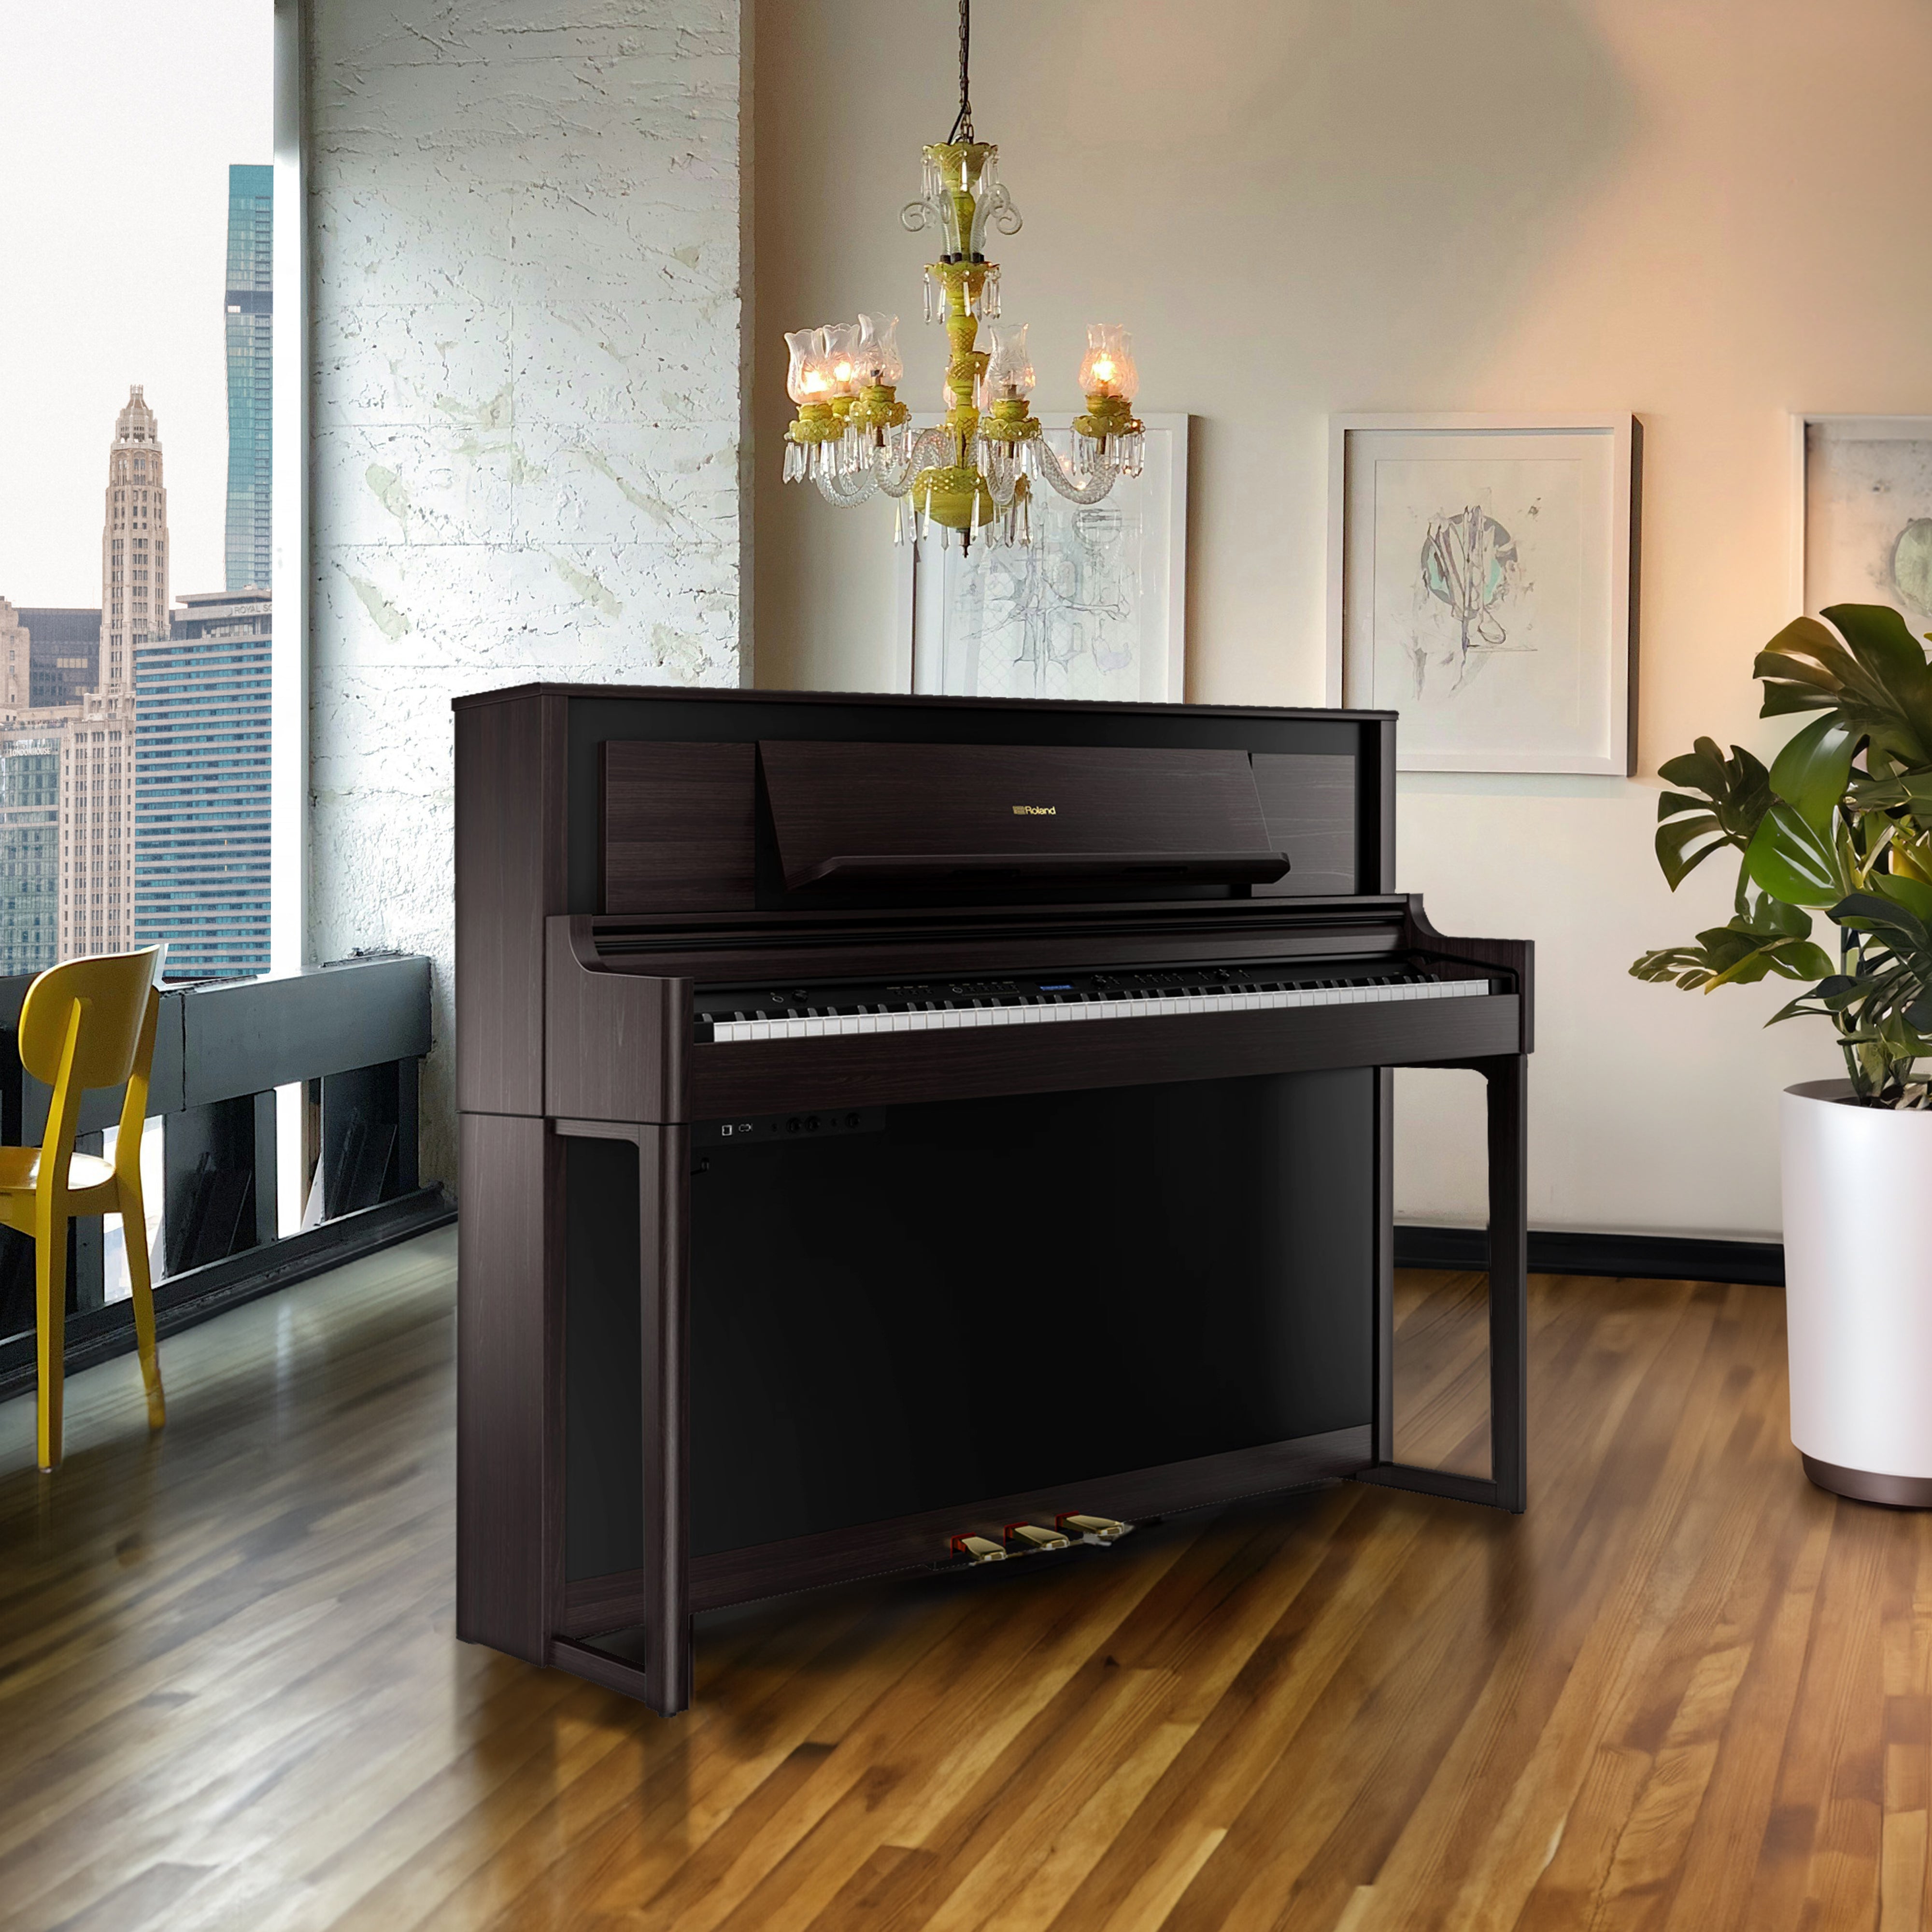 Roland LX706 Digital Piano - Dark Rosewood - in a stylish apartment downtown